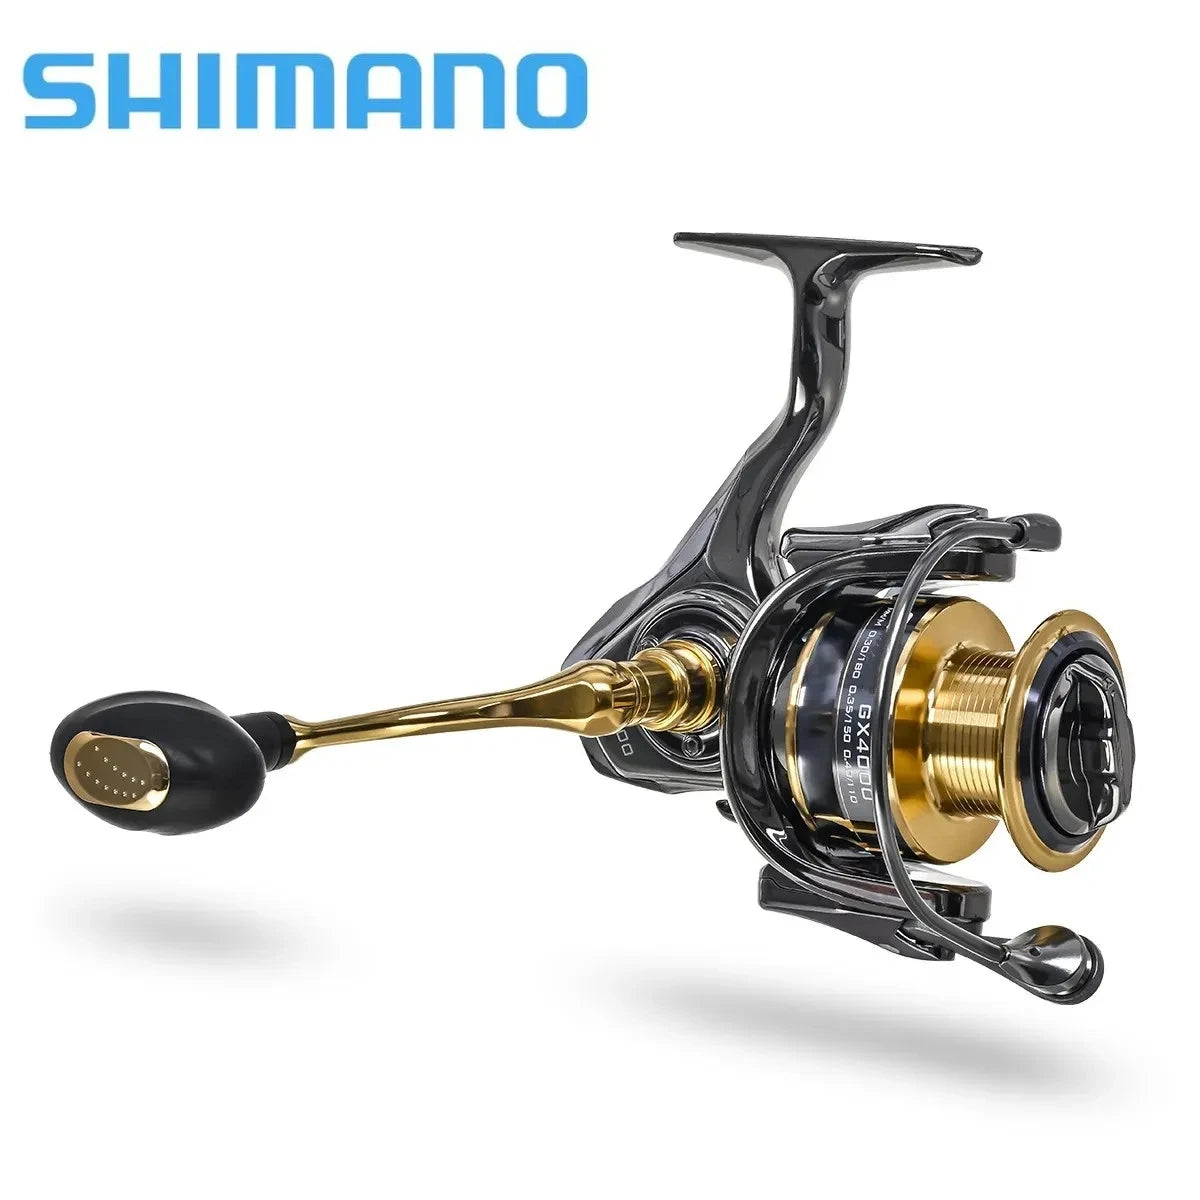 SHIMANO All Metal 15Kg Max Drag Spinning Reel | Versatile for All Waters"